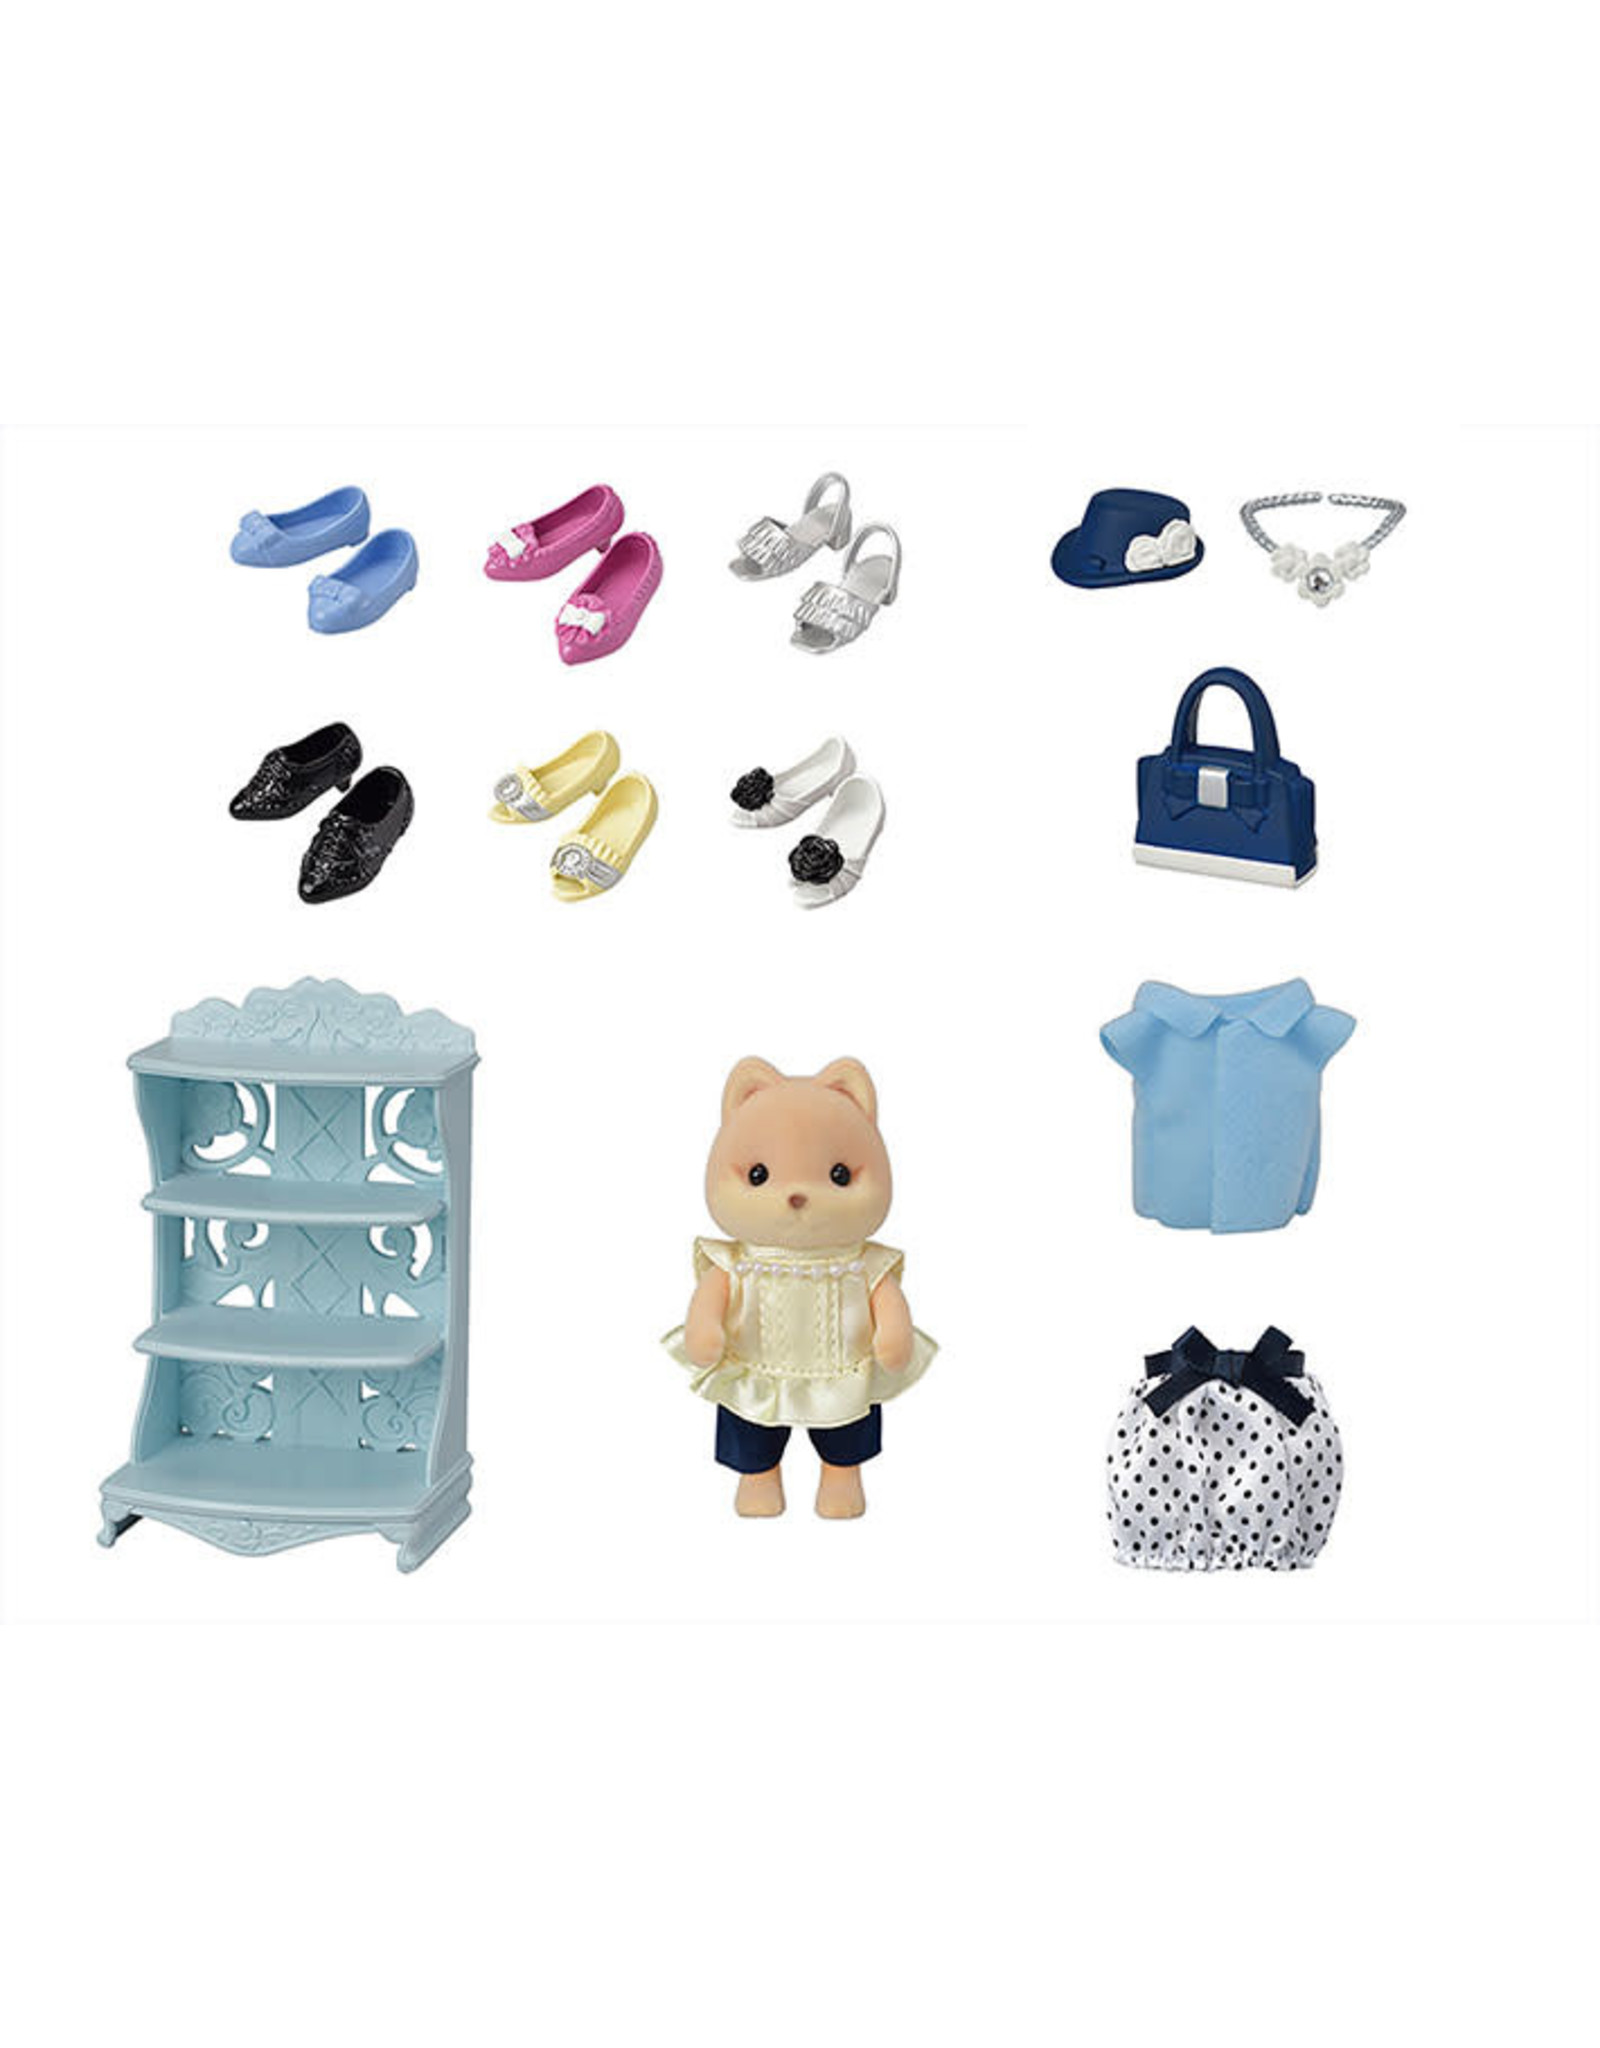 Calico Critters Fashion Playset Shoe Shop Collection